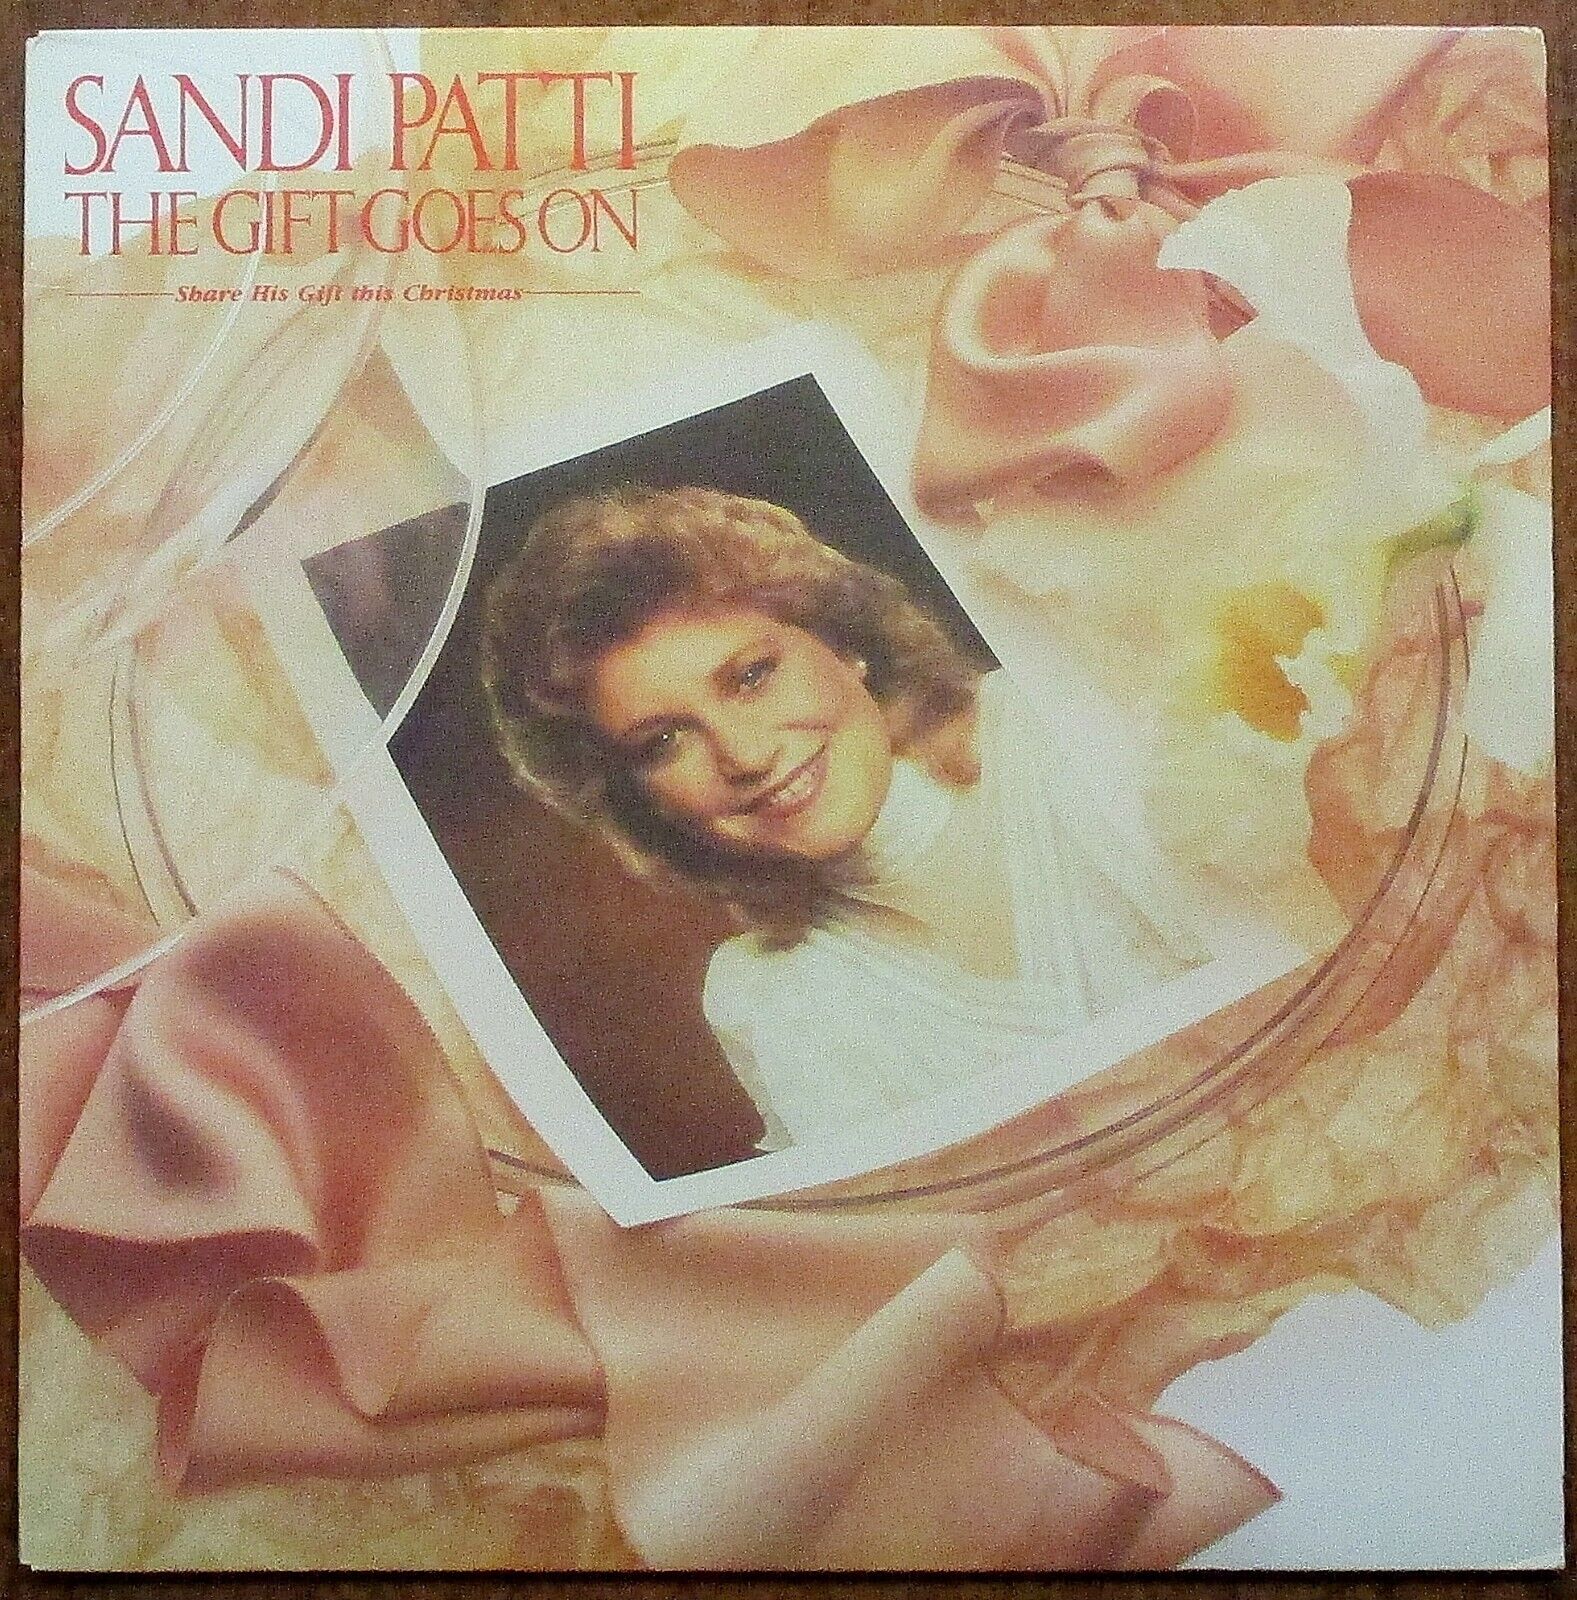 Sandi Patti "The Gift Goes On" Share His Gift This Christmas LP (1983)